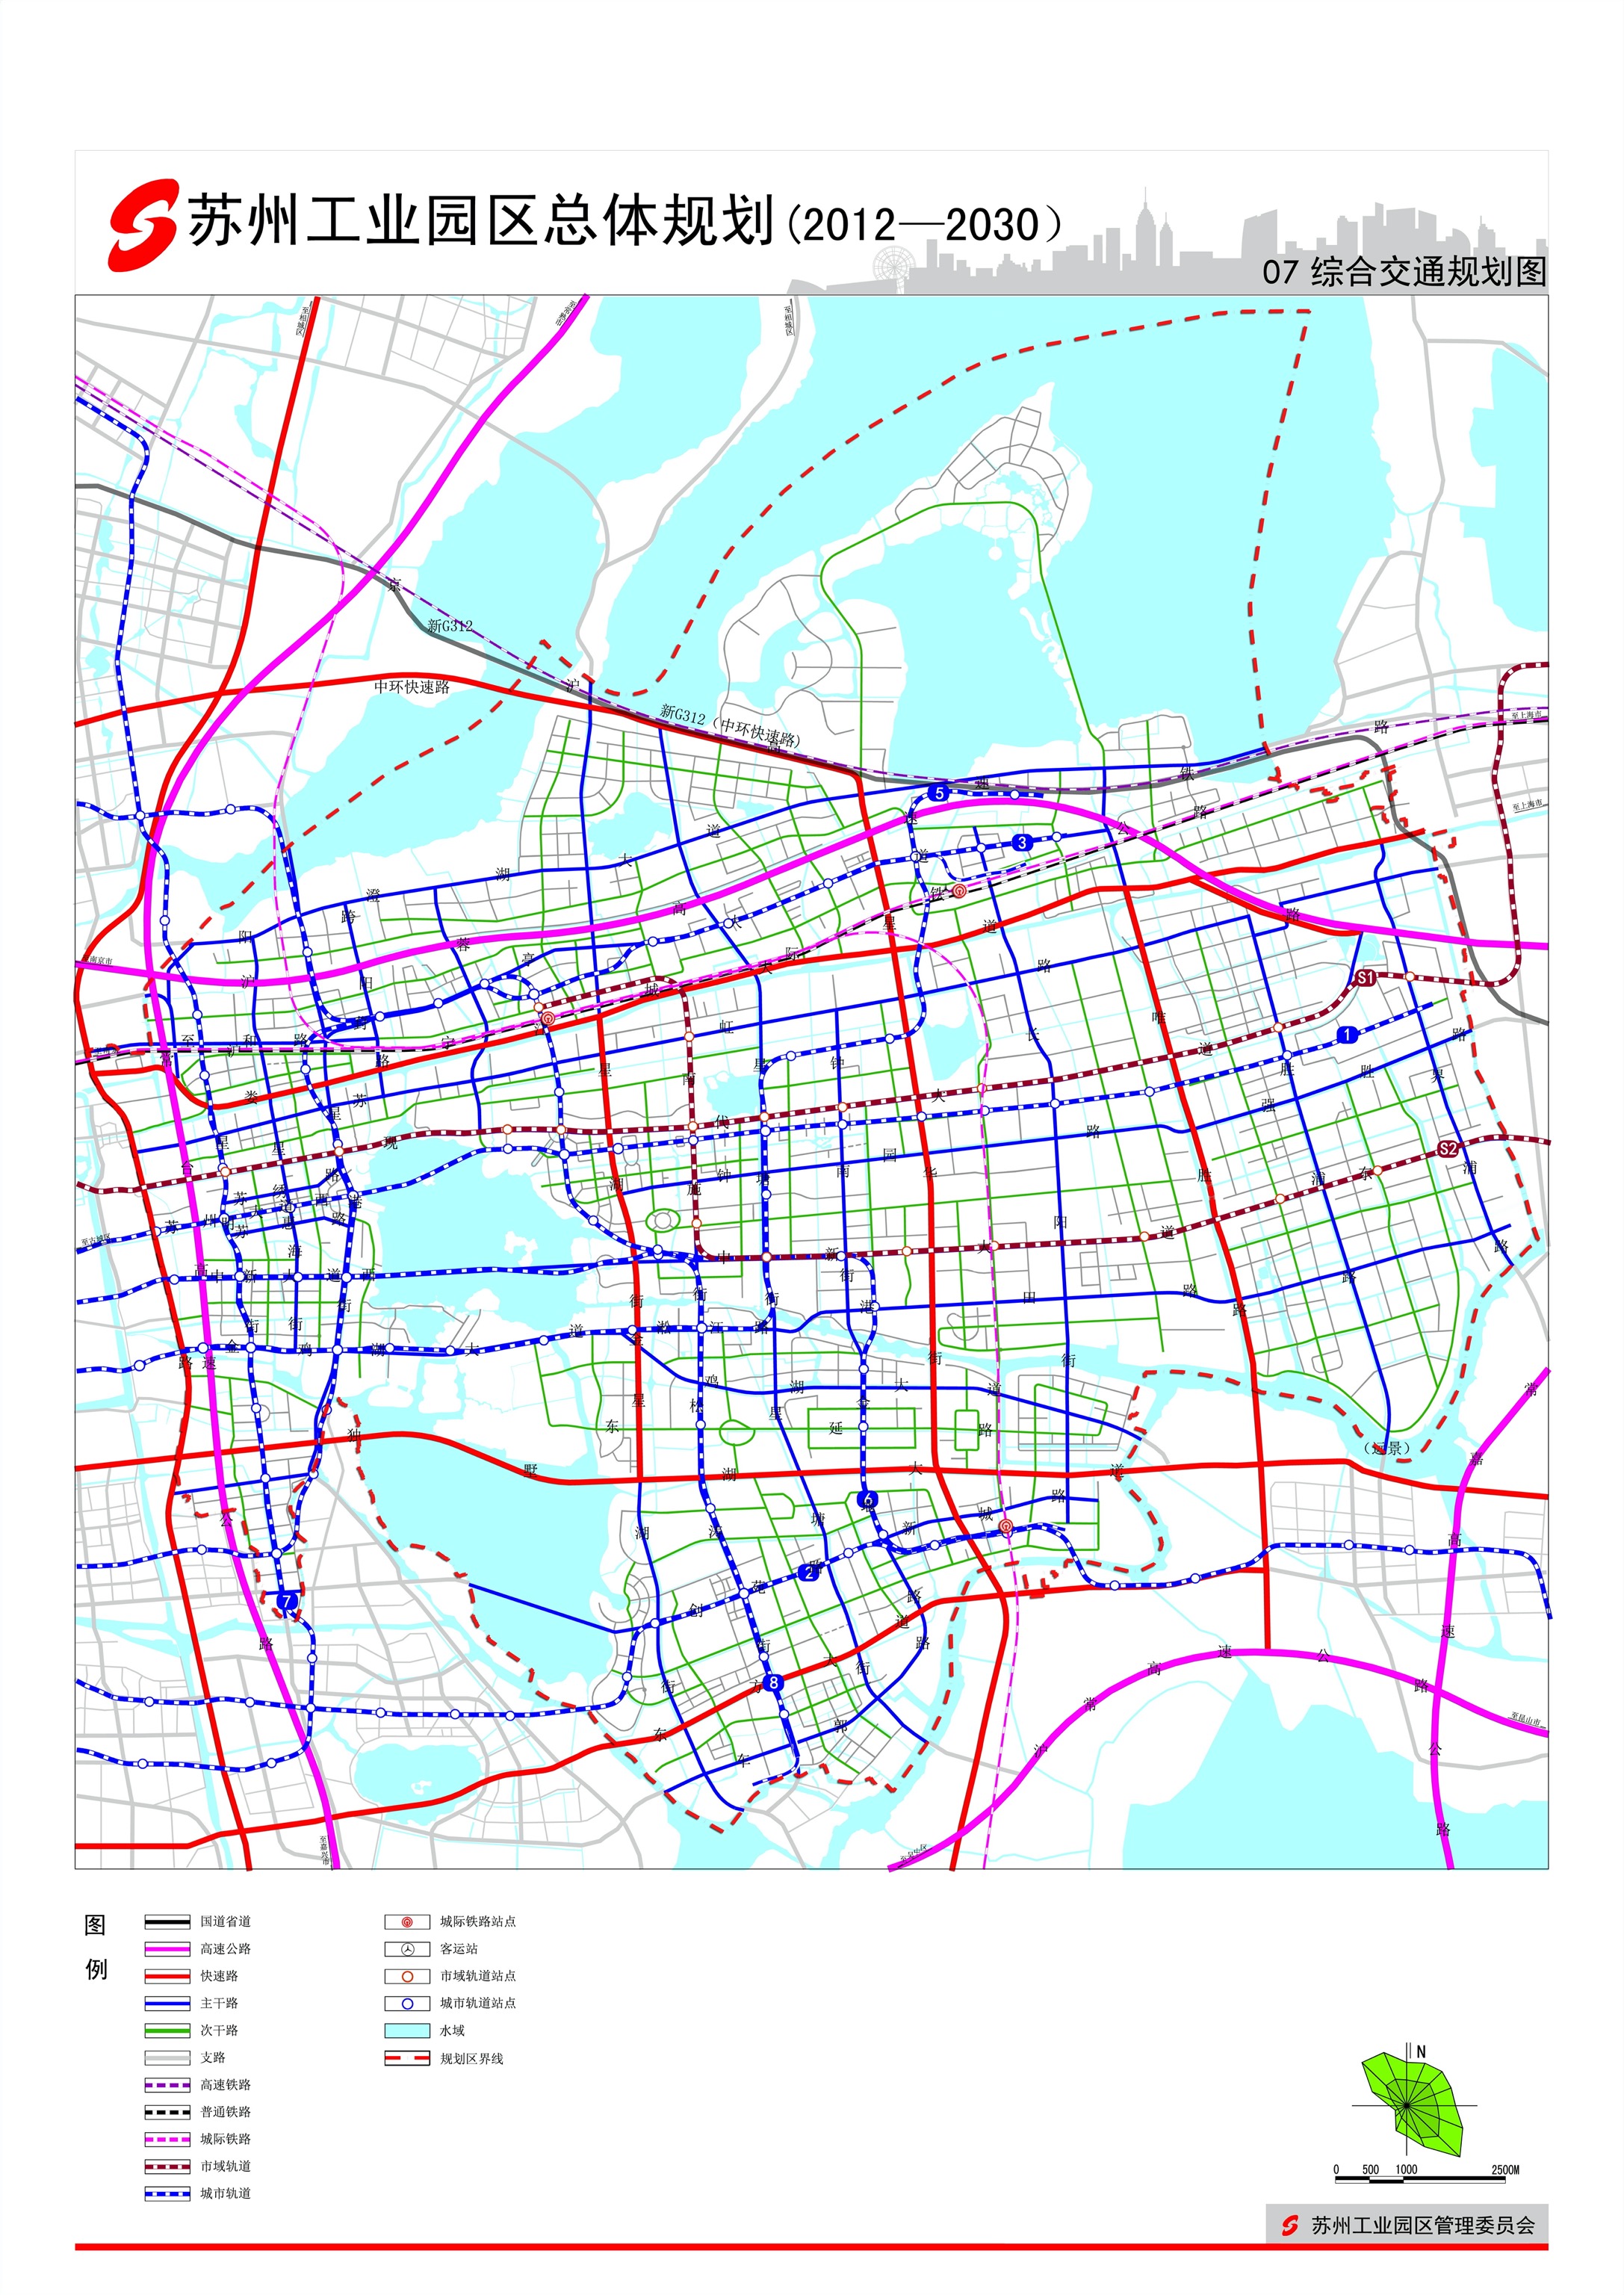 suzhou_overrall_layout_07_composite_traffic